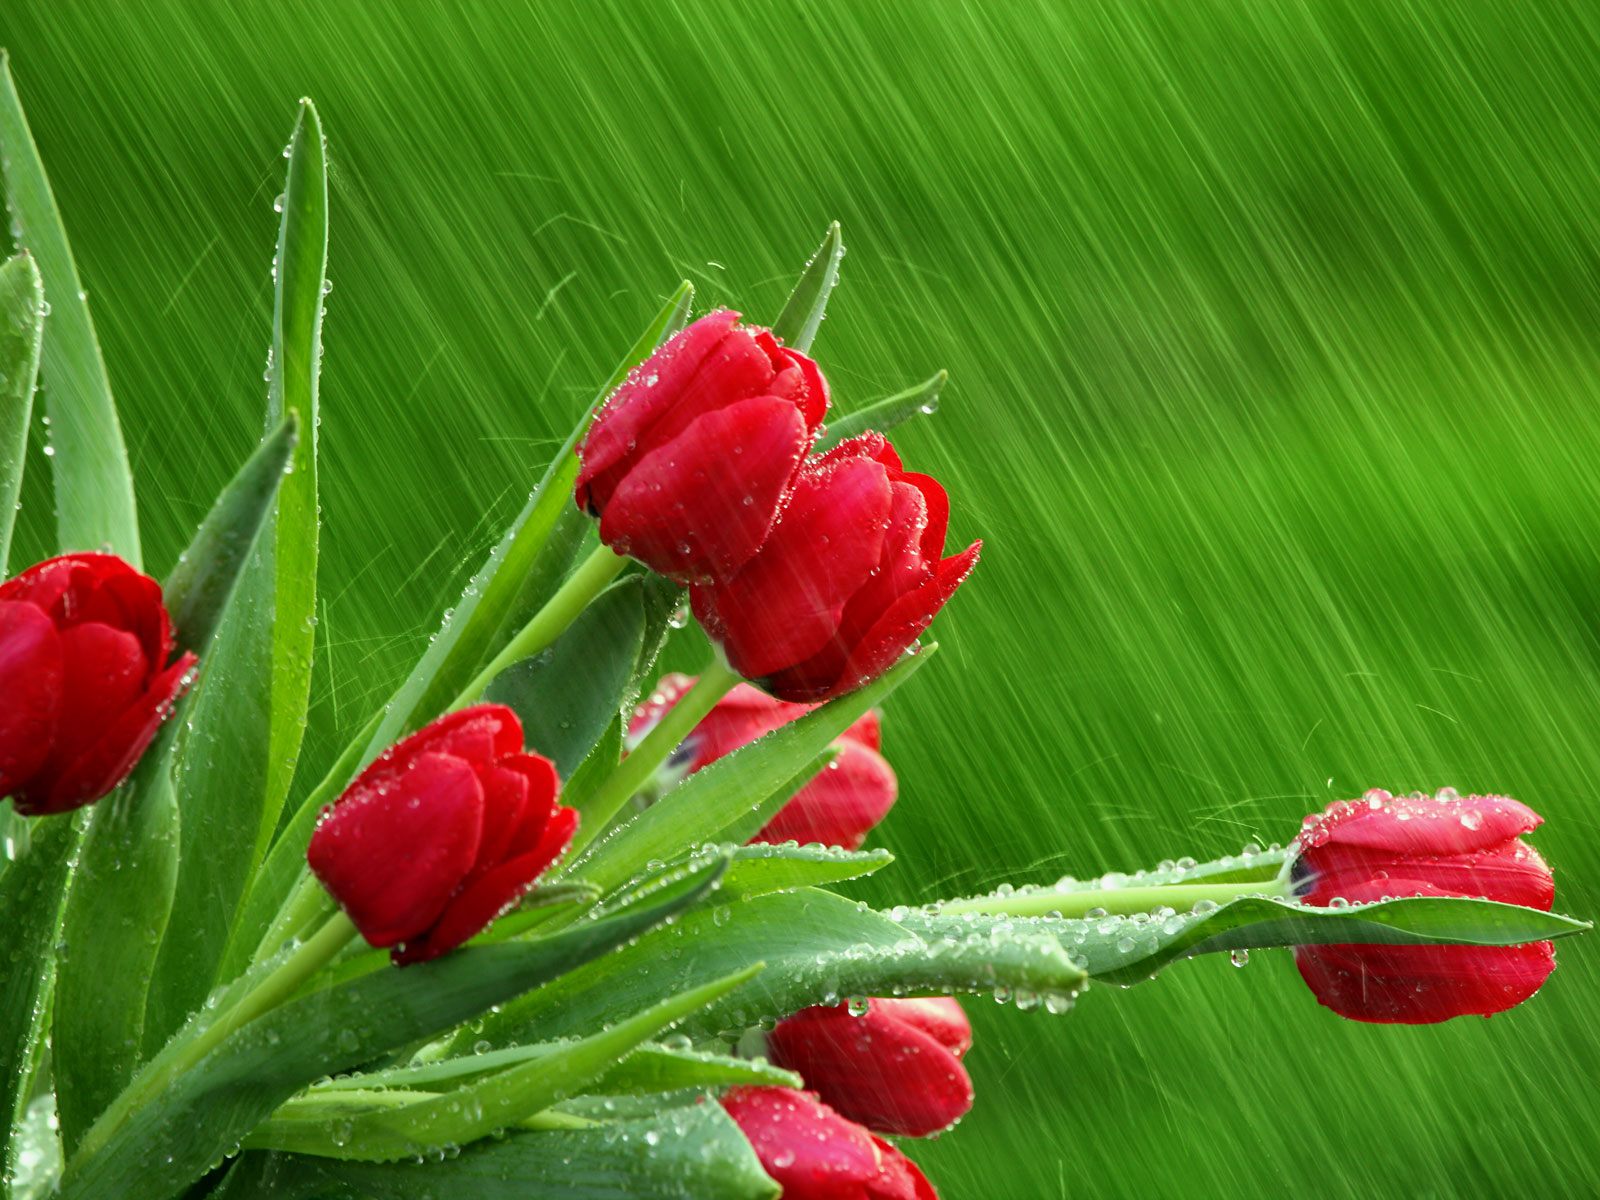 Rain On Flowers Wallpaper HD Pictures Image